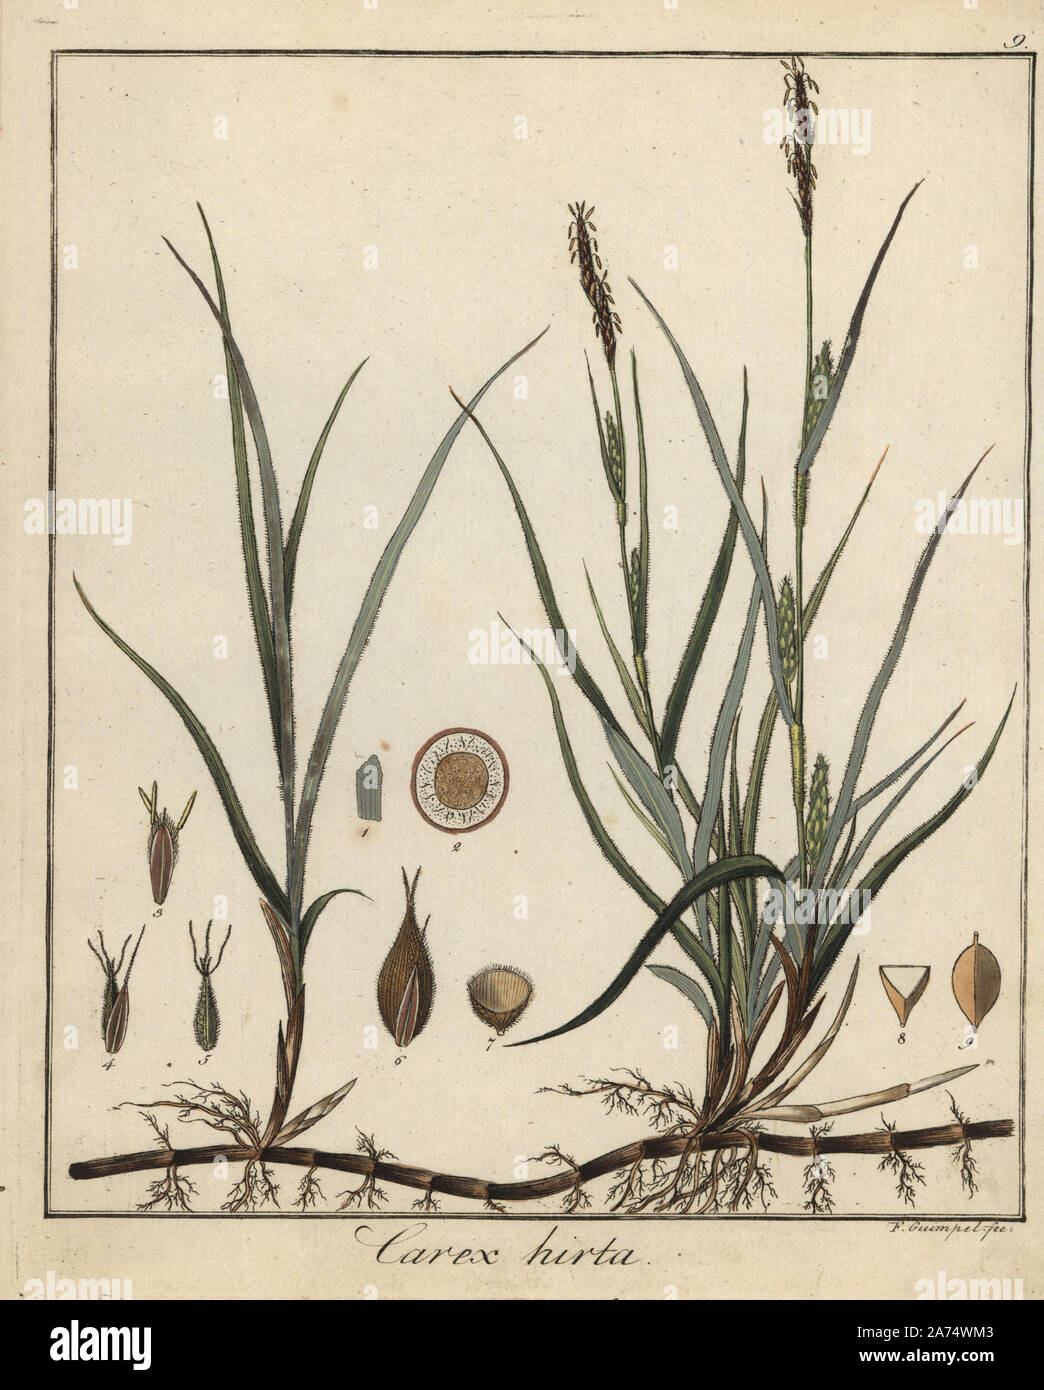 Hairy sedge, Carex hirta. Handcoloured copperplate engraving by F. Guimpel from Dr. Friedrich Gottlob Hayne's Medical Botany, Berlin, 1822. Hayne (1763-1832) was a German botanist, apothecary and professor of pharmaceutical botany at Berlin University. Stock Photo